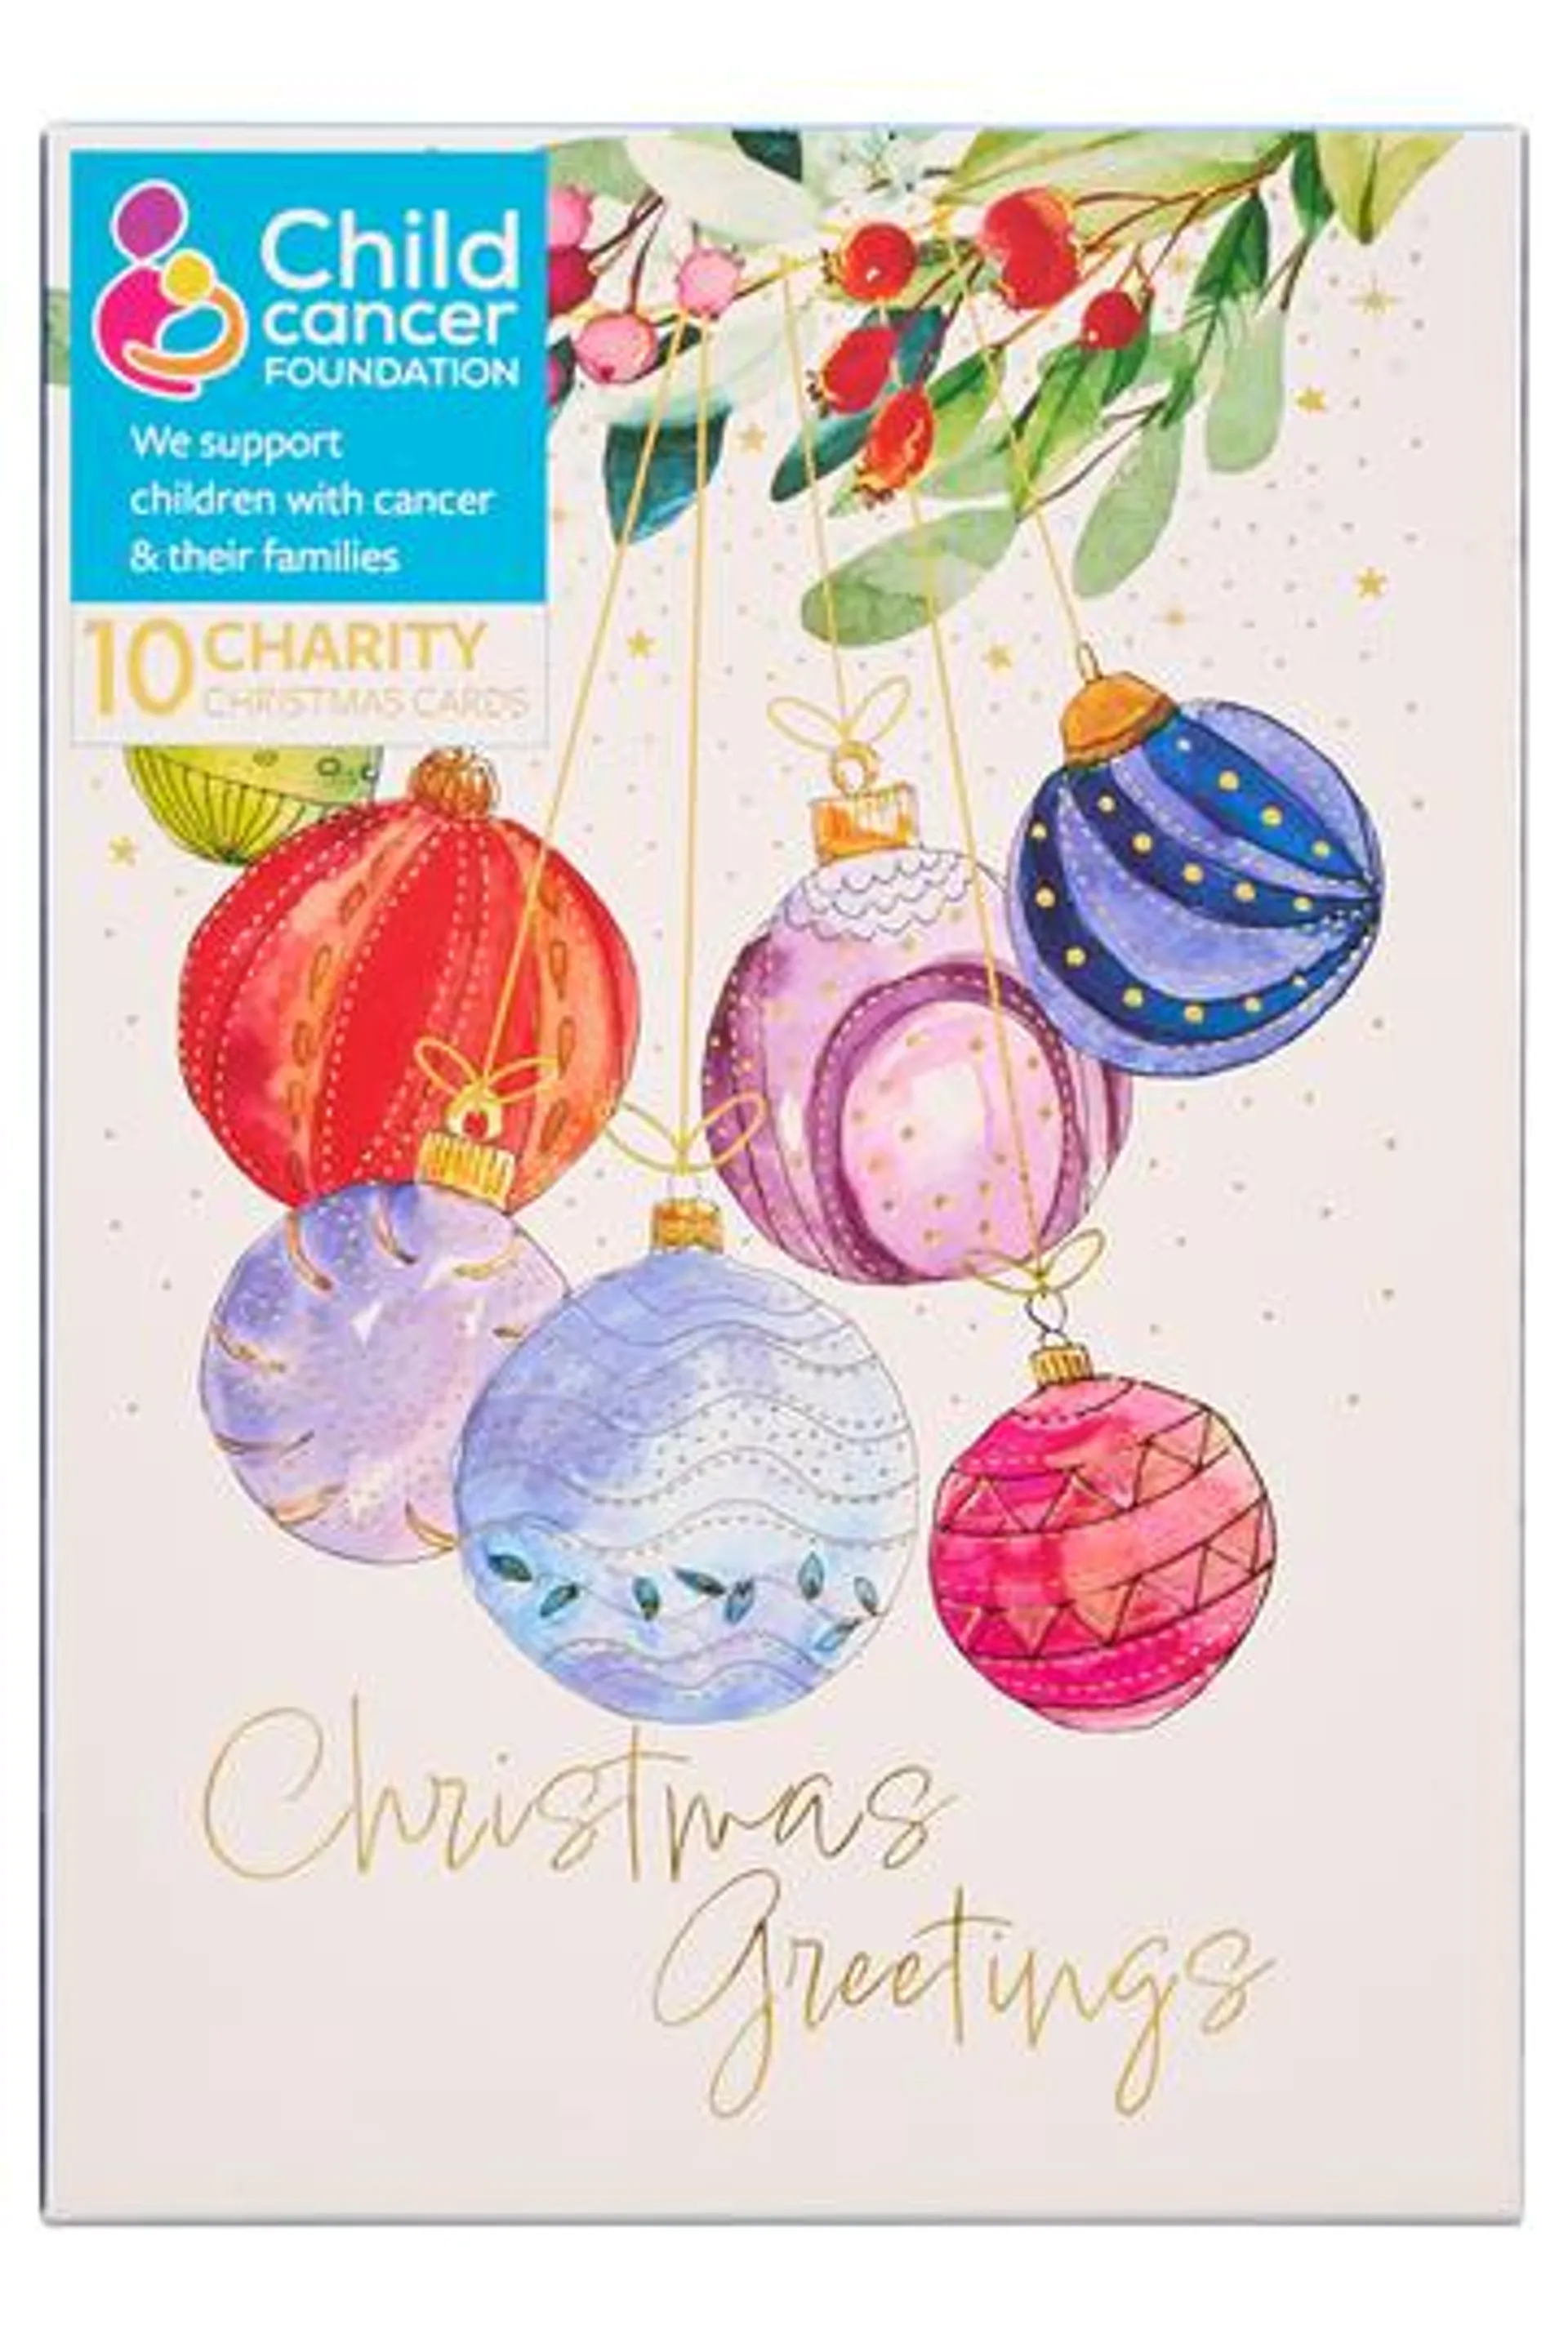 Child Cancer Foundation Charity Christmas Cards Baubles